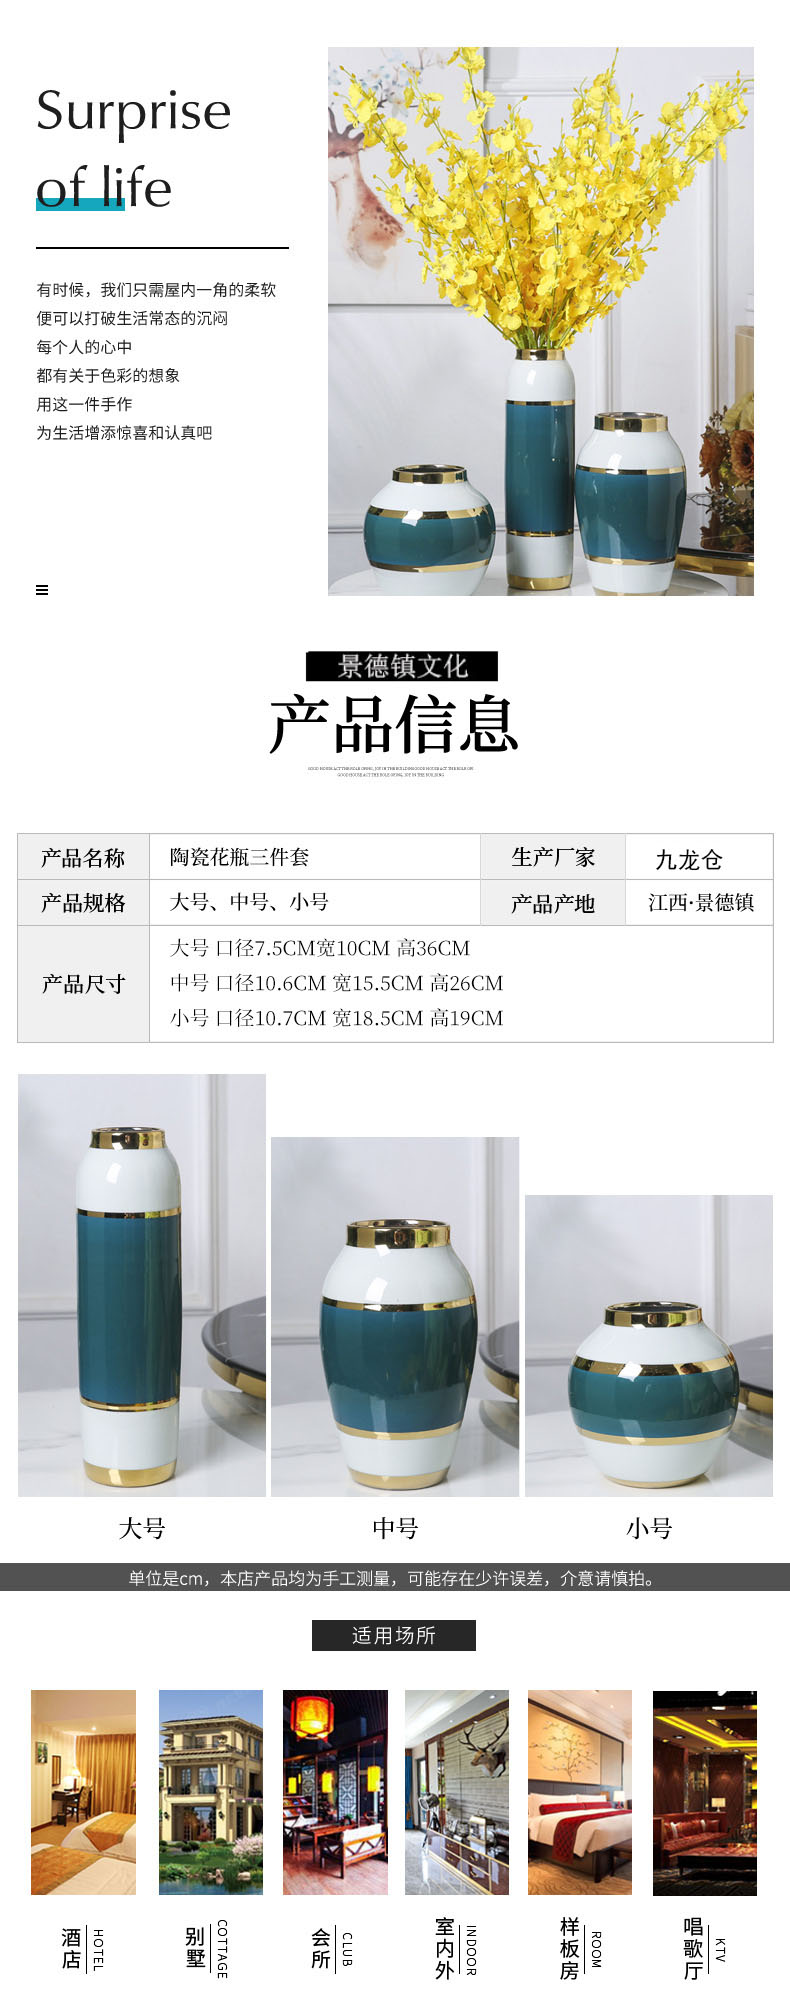 Contracted light the key-2 luxury of jingdezhen ceramic vase three - piece ceramic crafts home furnishing articles decorative flower porcelain